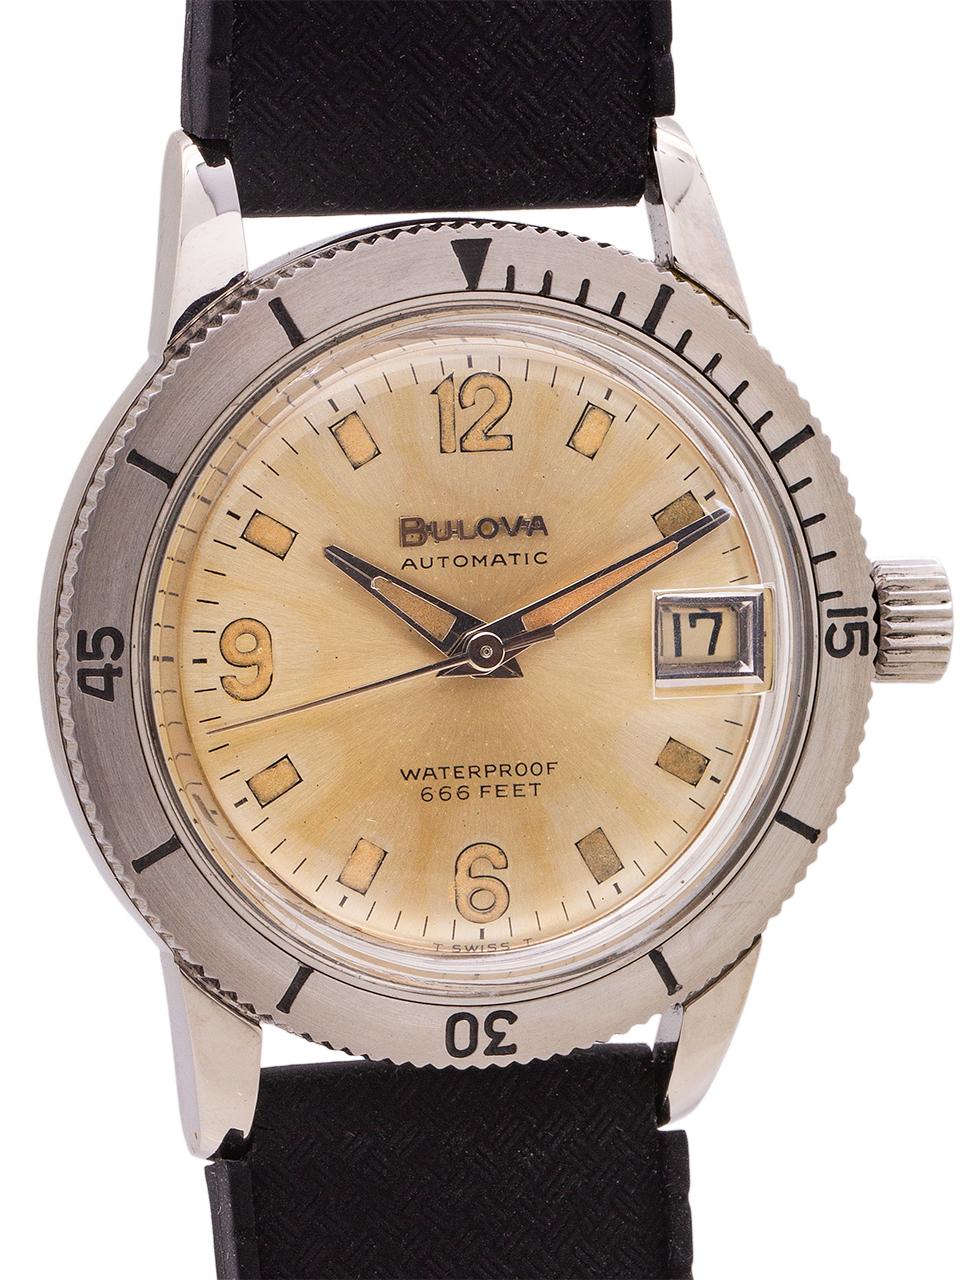 
Bulova stainless steel Diver’s circa 1960. 34mm diameter case with rotating elapsed time bezel. Original matte silver dial with patina’d luminous indexes in a mixture of sticks and arabic numerals, with matching hands. Dial also features a raised